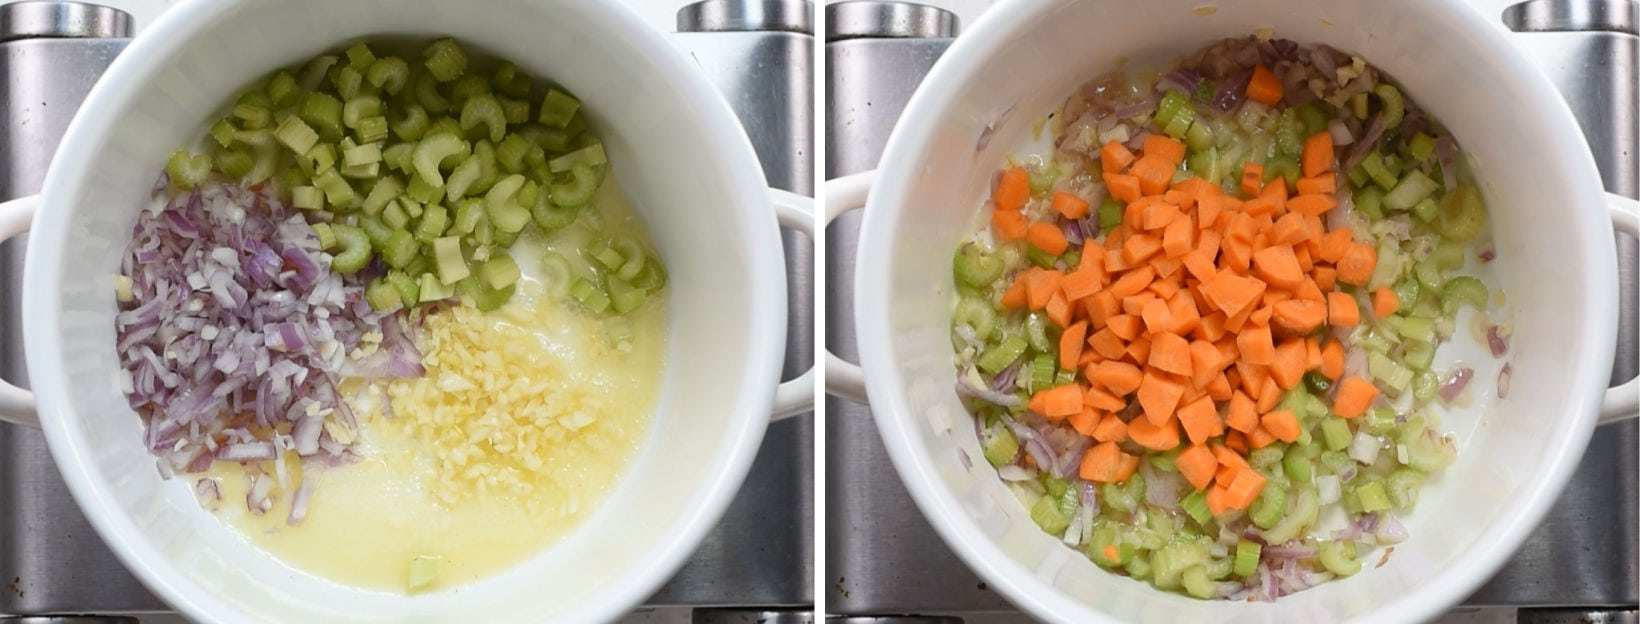 First step to make the white bean soup is to sauté onion, celery, garlic and carrot. 